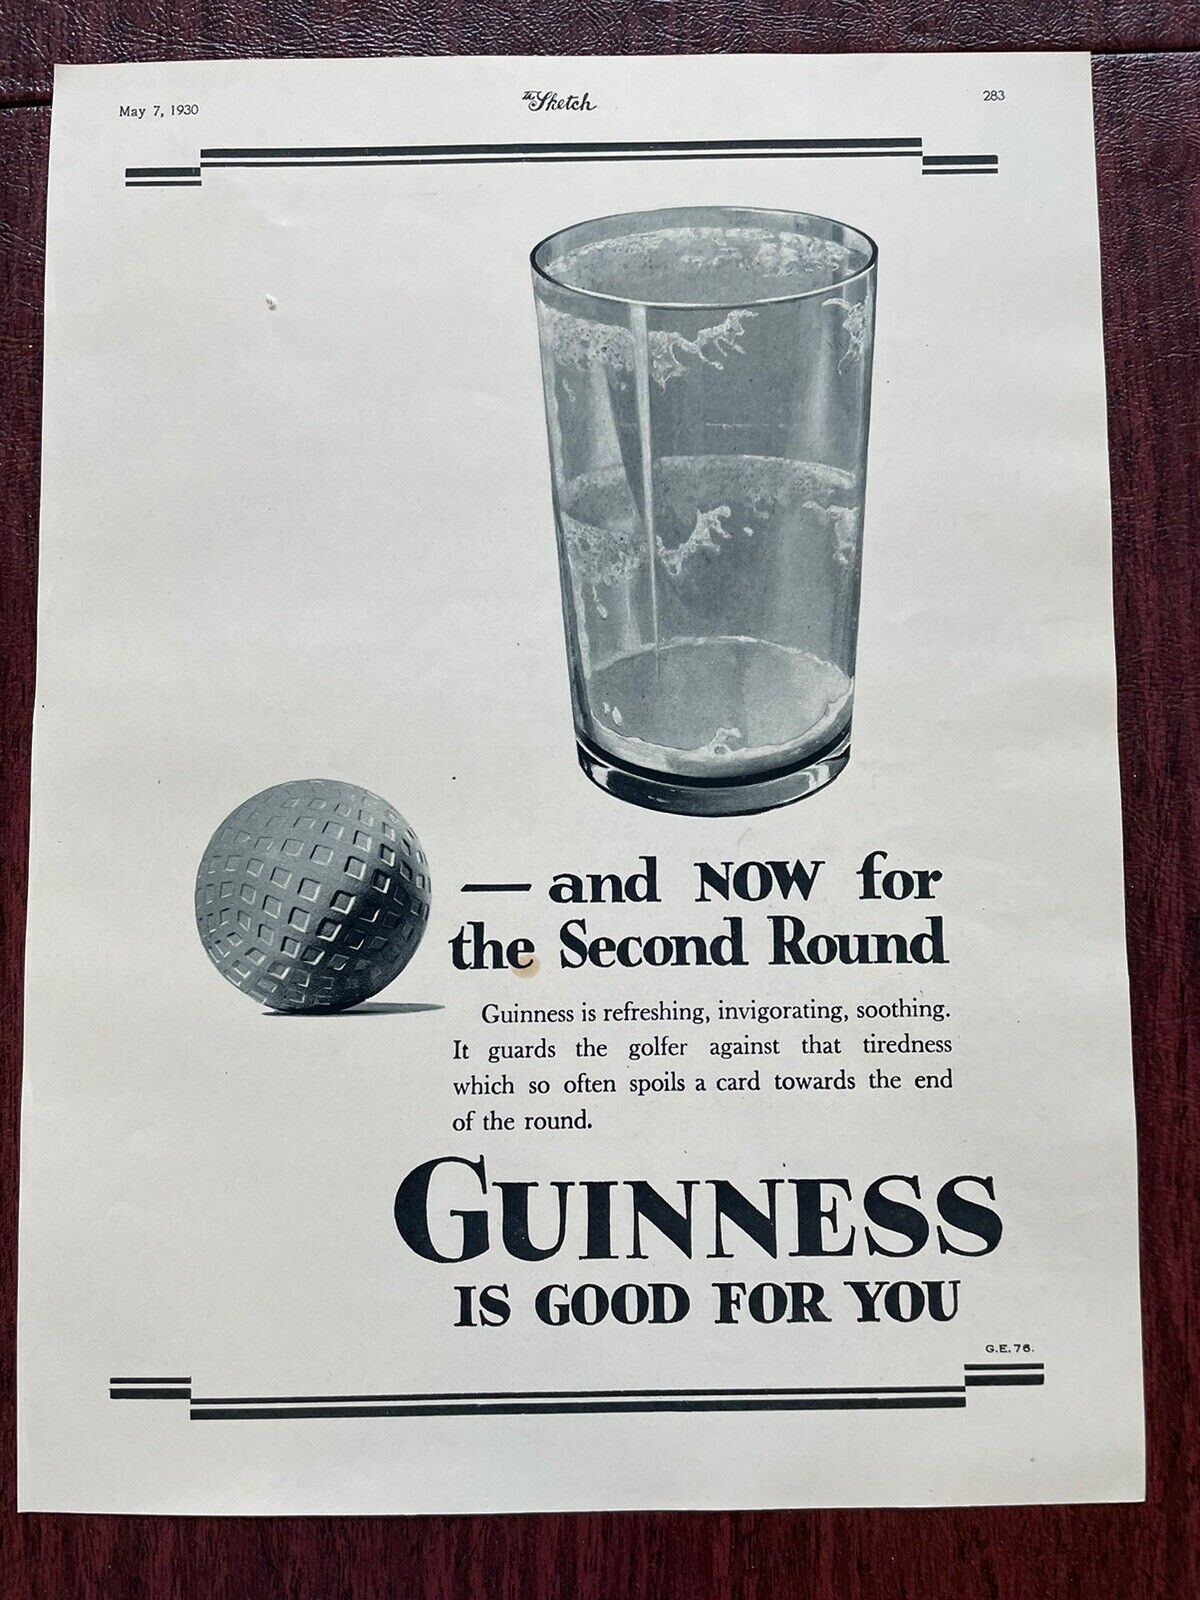 Guinness Ad Vintage Second Round Golf Guinness Is Good for You The Sketch 1930